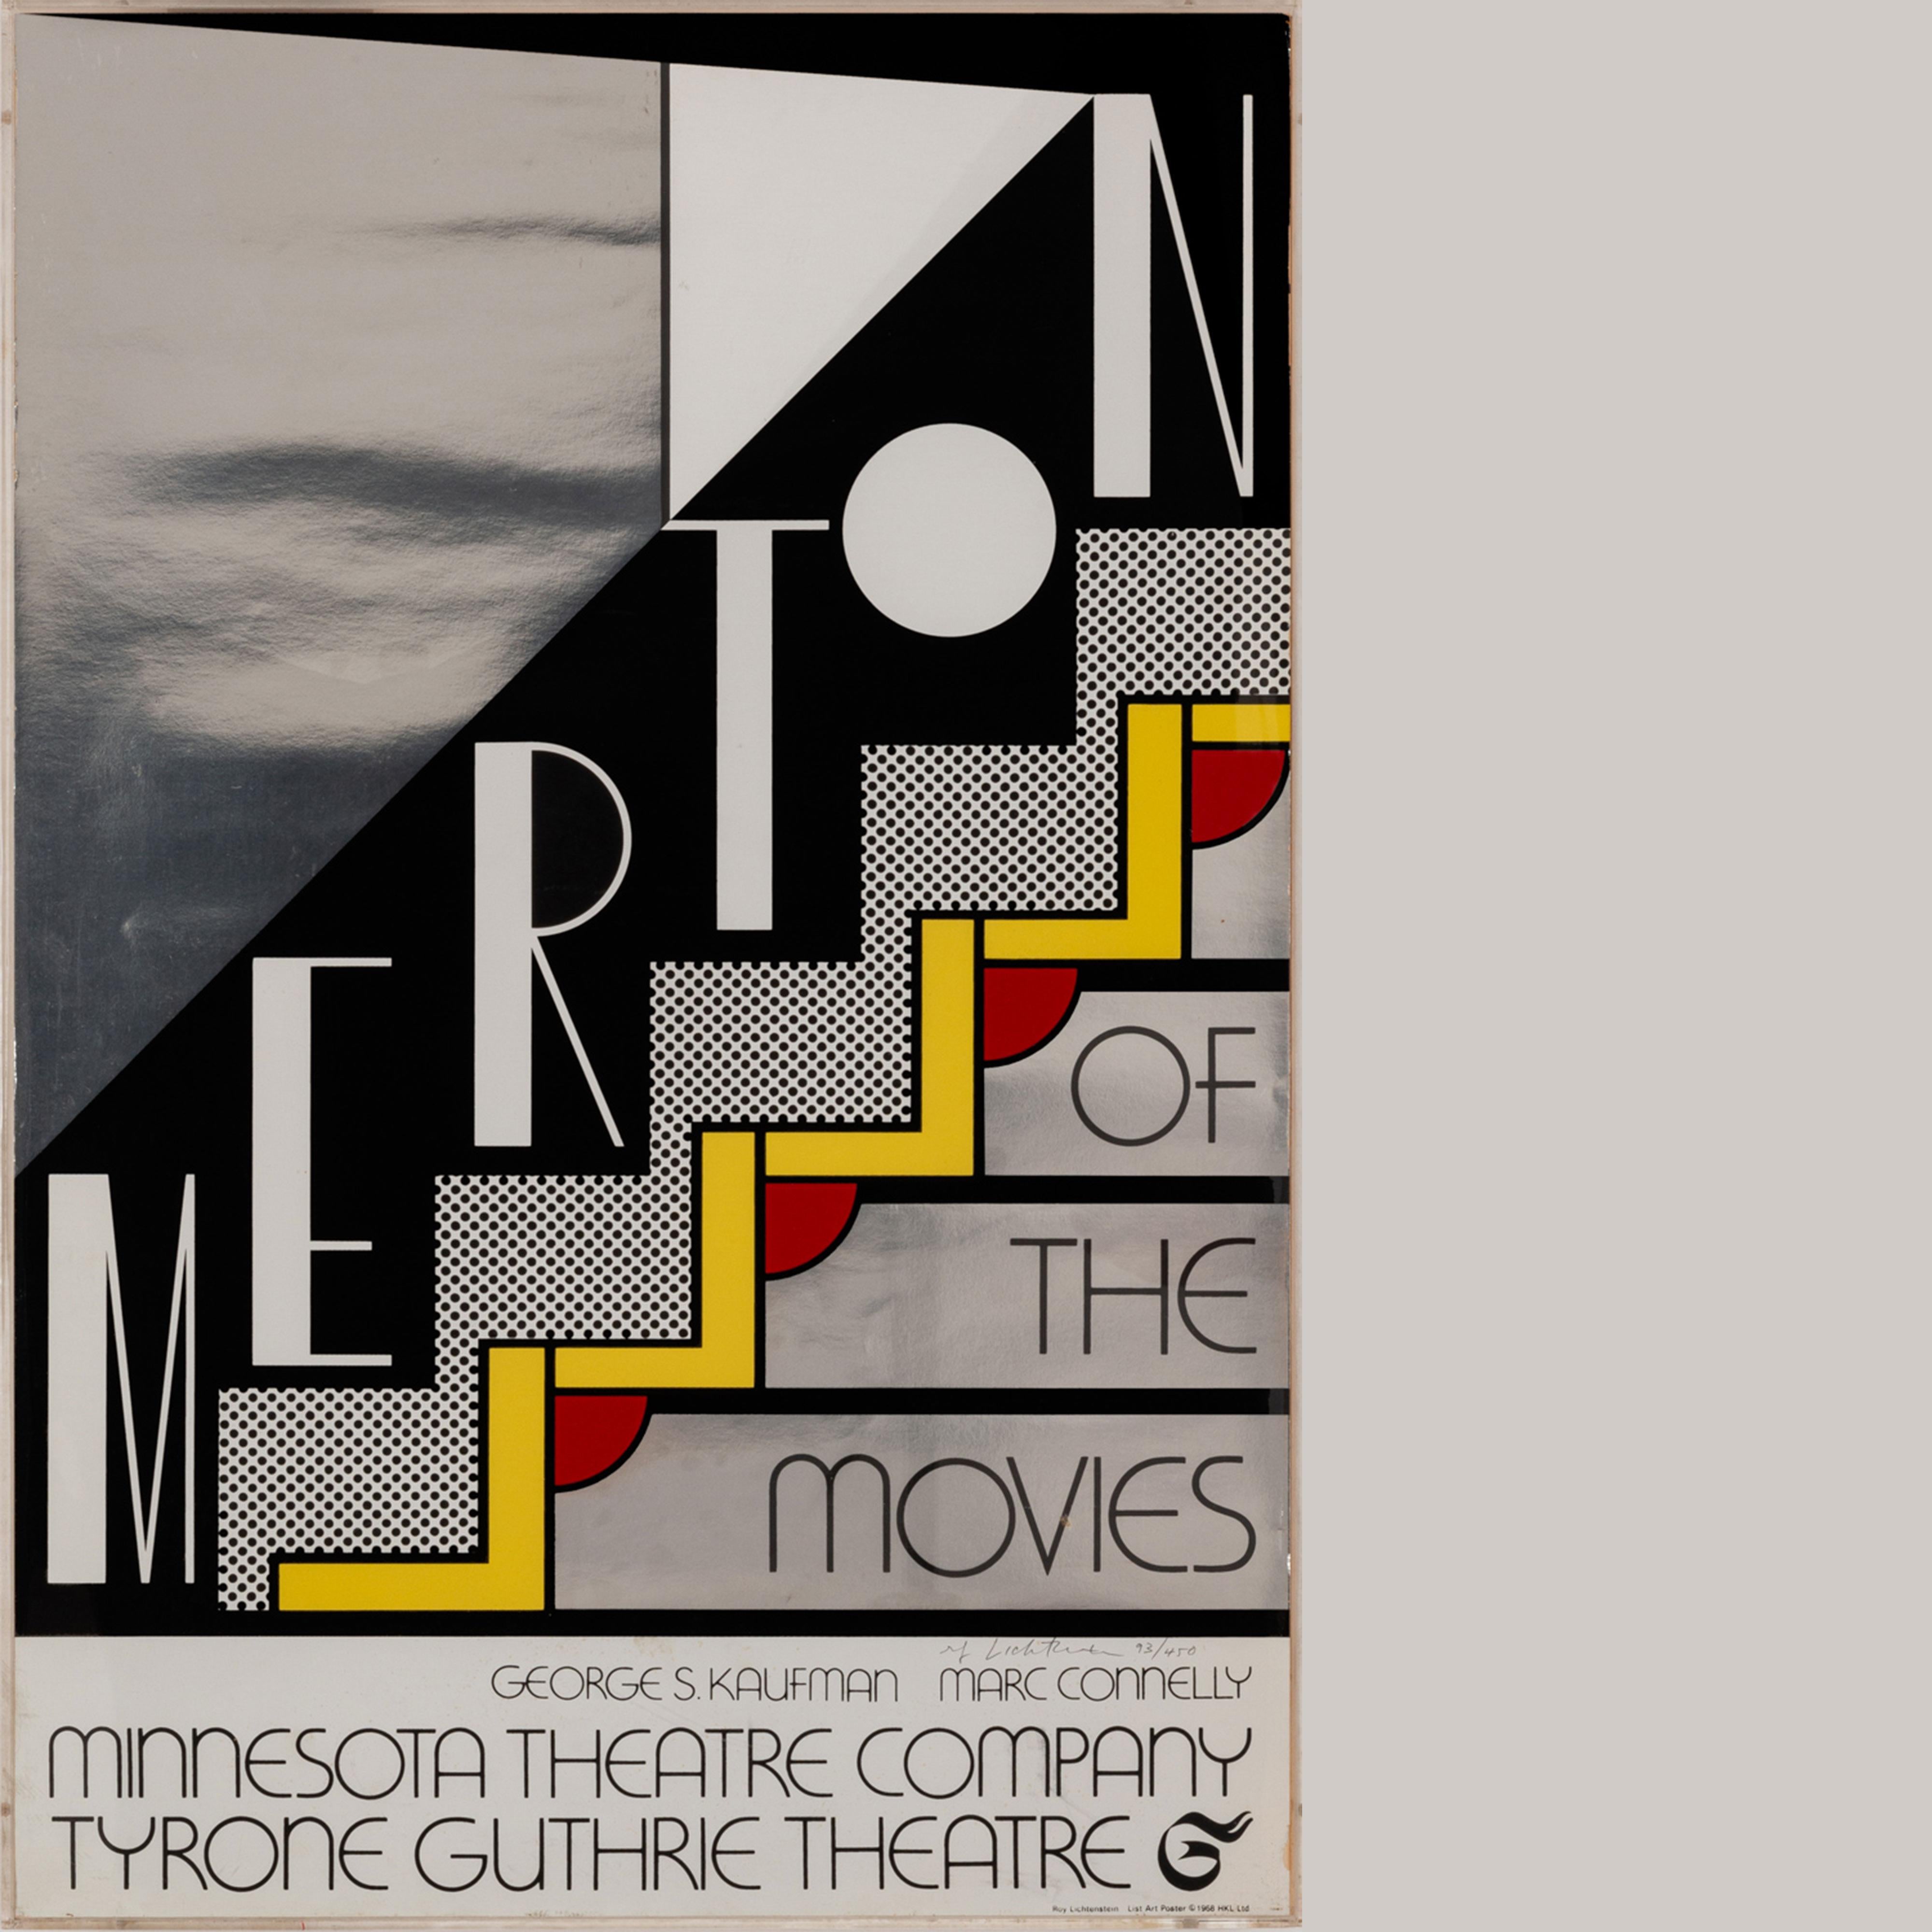 Merton of the movies, 1968 by Roy Lichtenstein.

The work is a Silkscreen on silver paper, 76 × 51 × 0.2 cm, Edition 93/450.

Literature: 

Co-published by Lincoln Center/List Poster and Print Program and H.K.L. Ltd., New York, and Boston.
As the